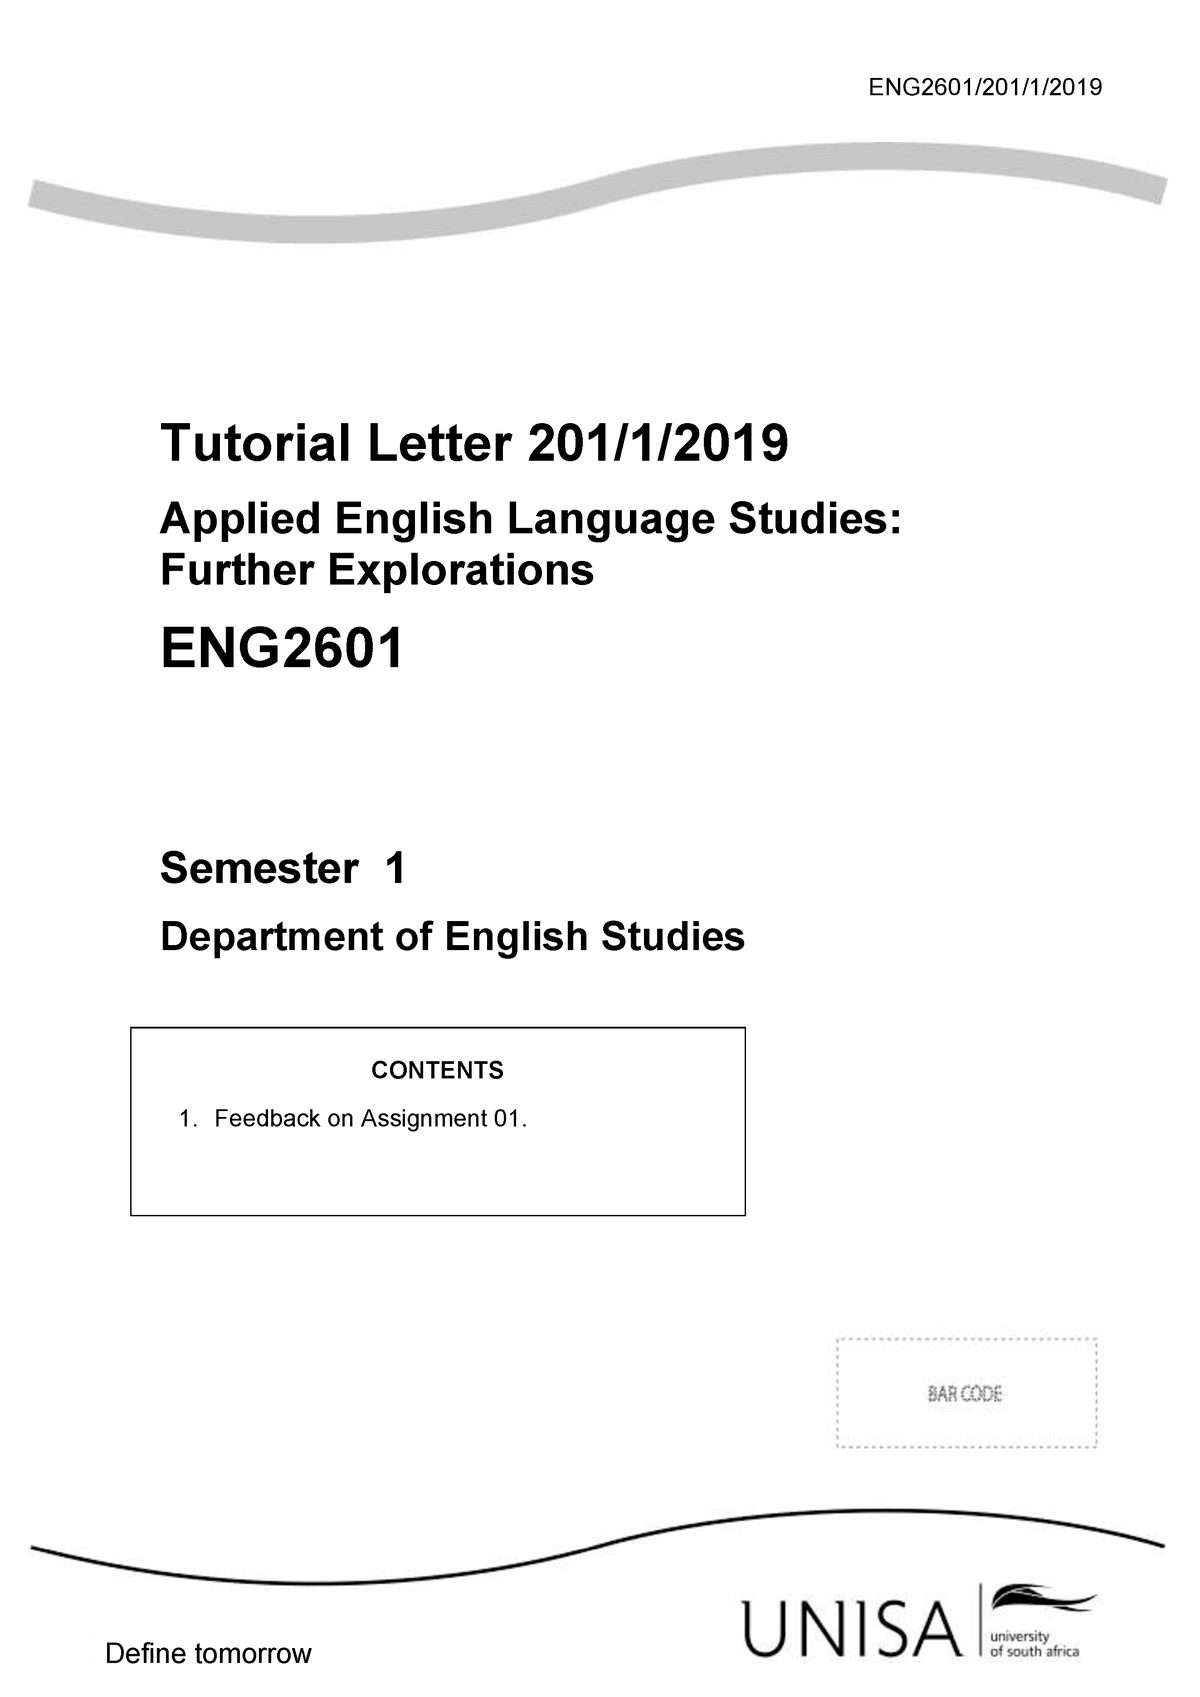 TUT 201 ENG 2601 - TUTORIAL WITH ASSIGNMENTS - Tutorial Letter Applied ...